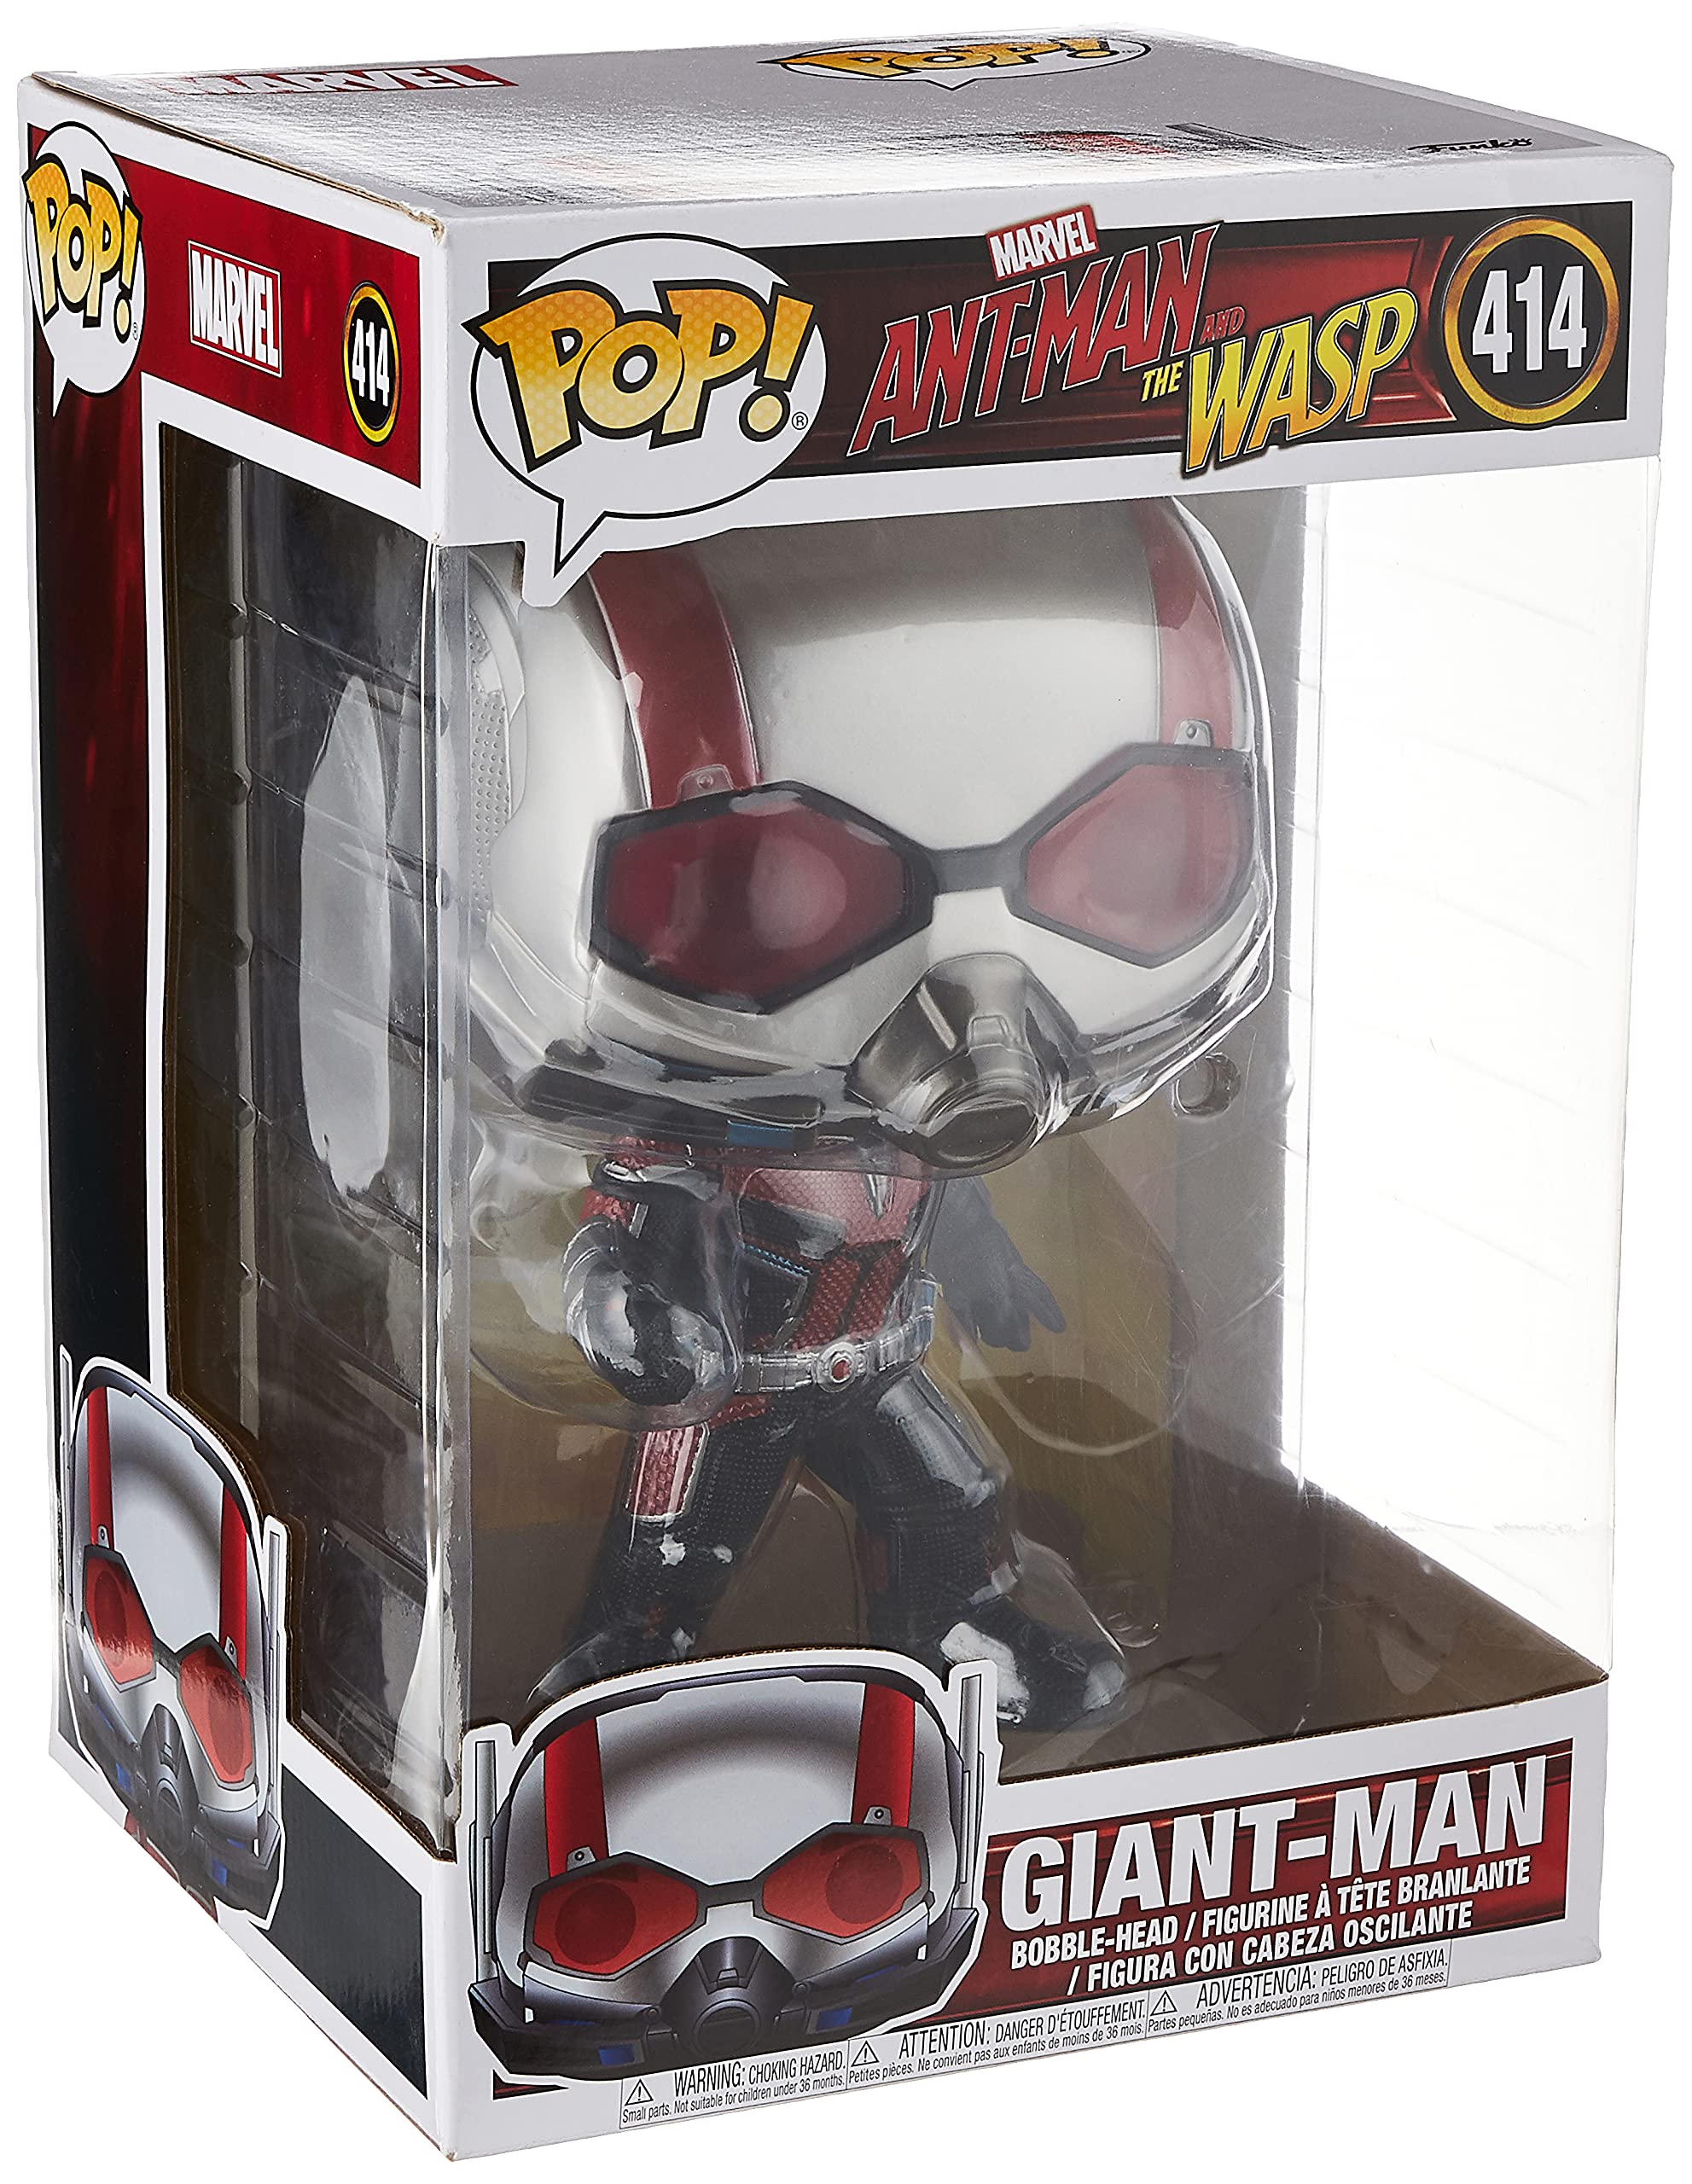 Funko Pop! Marvel: Ant-Man & The Wasp - 10 Inch Giant Man, Amazon Exclusive